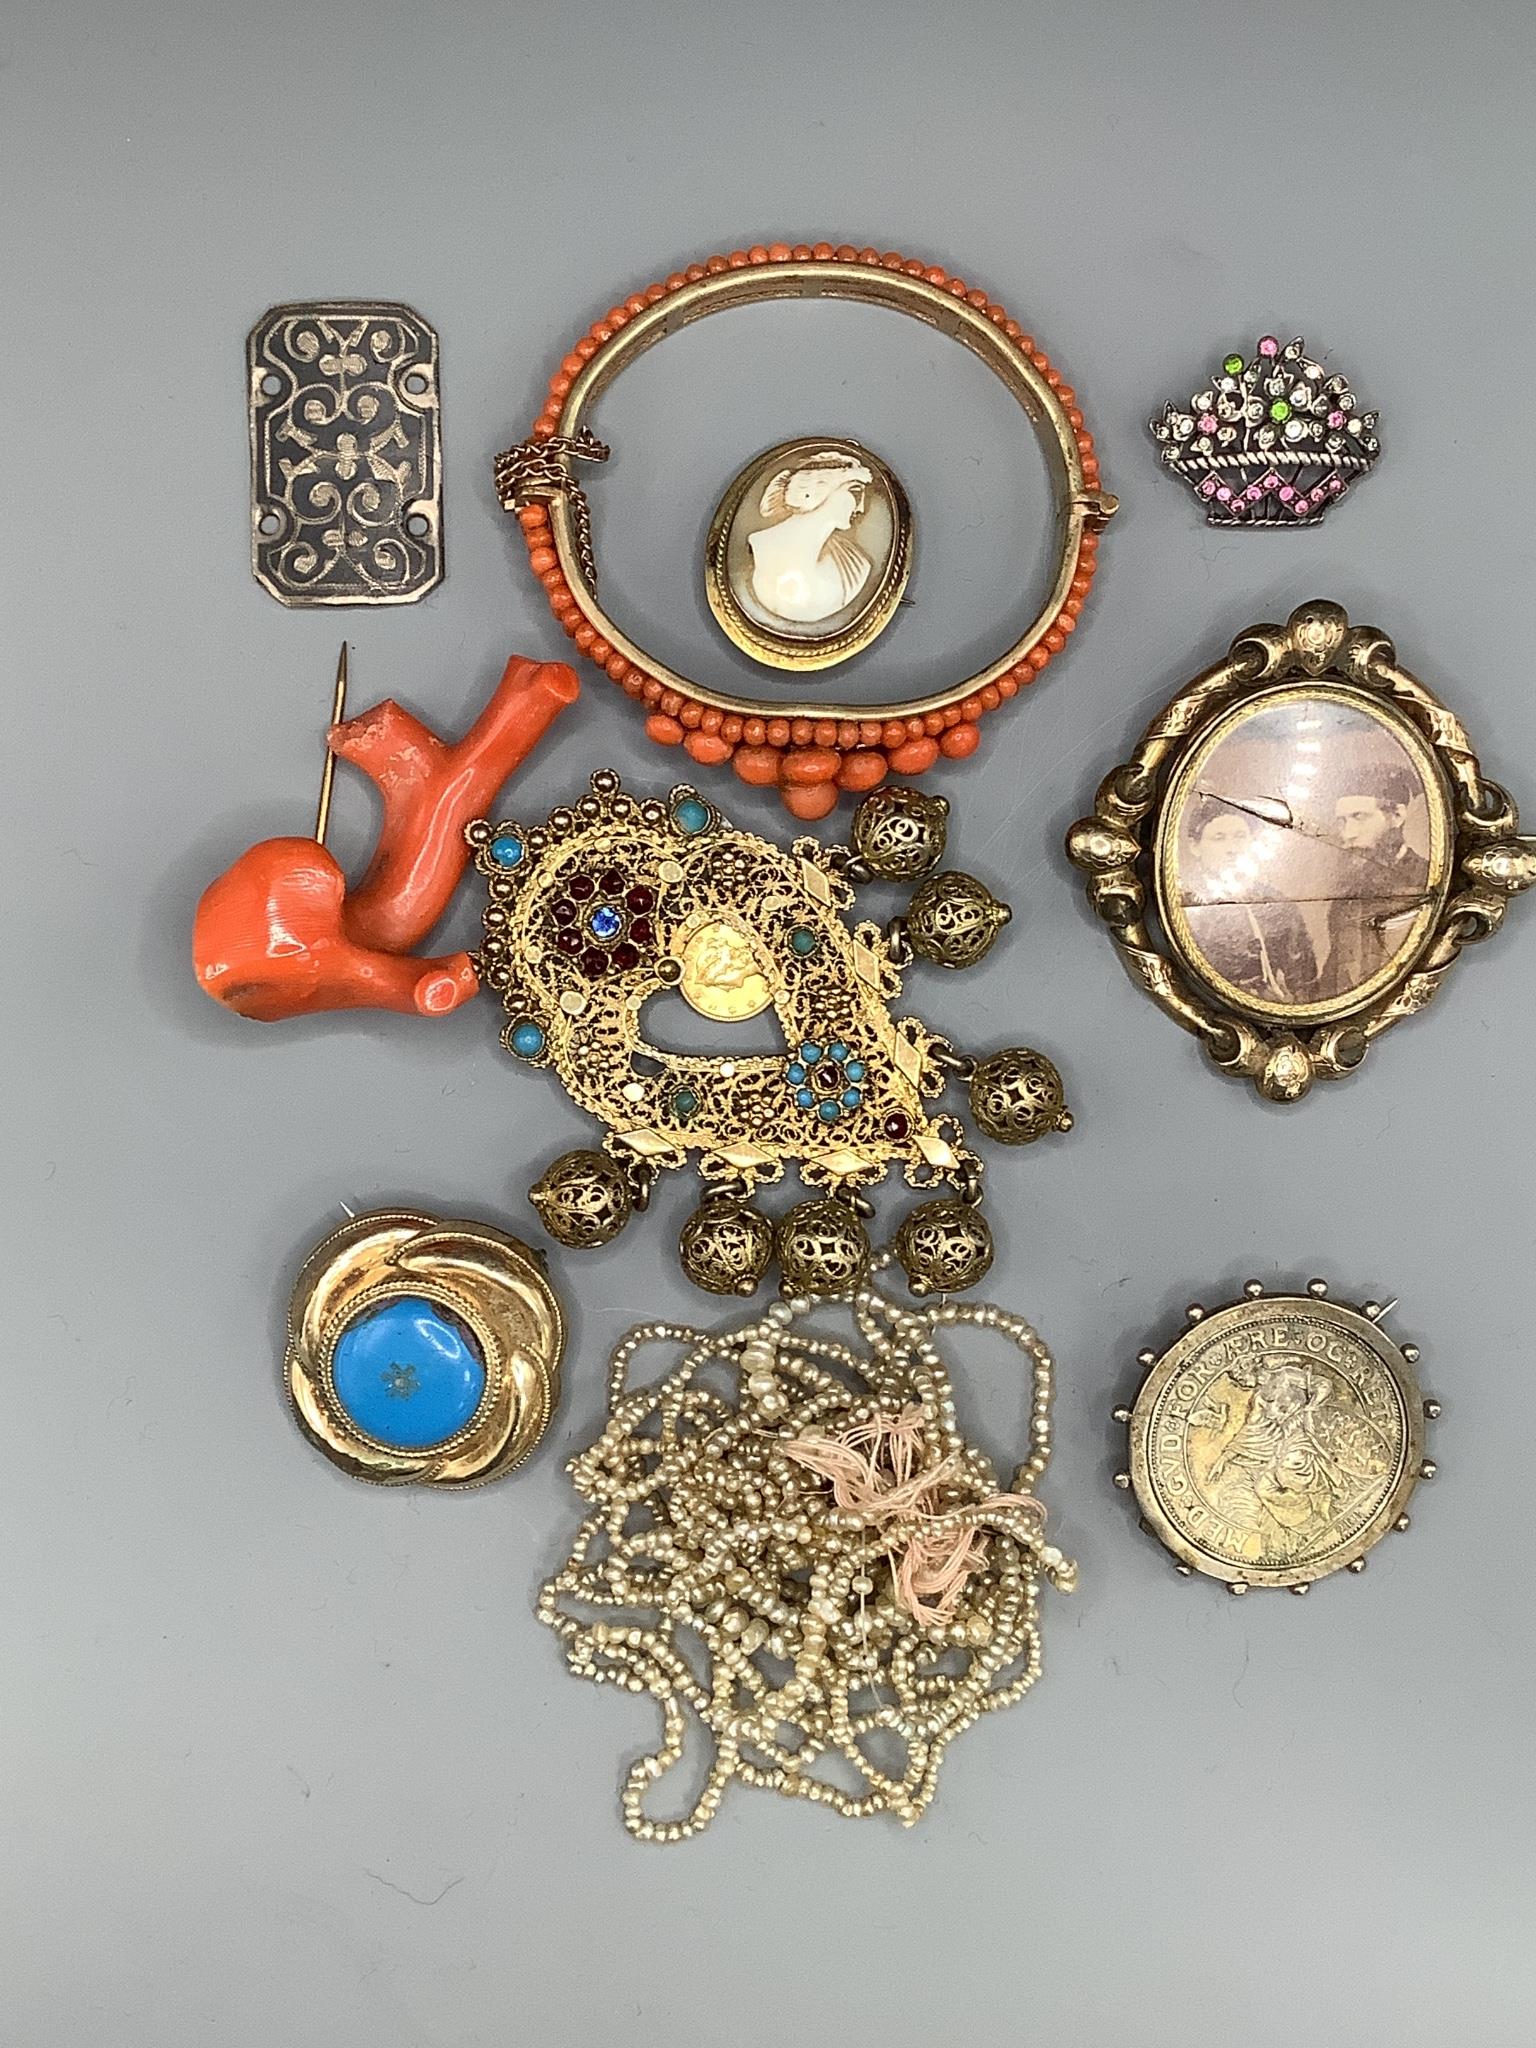 Minor jewellery including gilt metal and coral bead hinged bangle, cameo brooch, mourning brooch, necklaces etc.